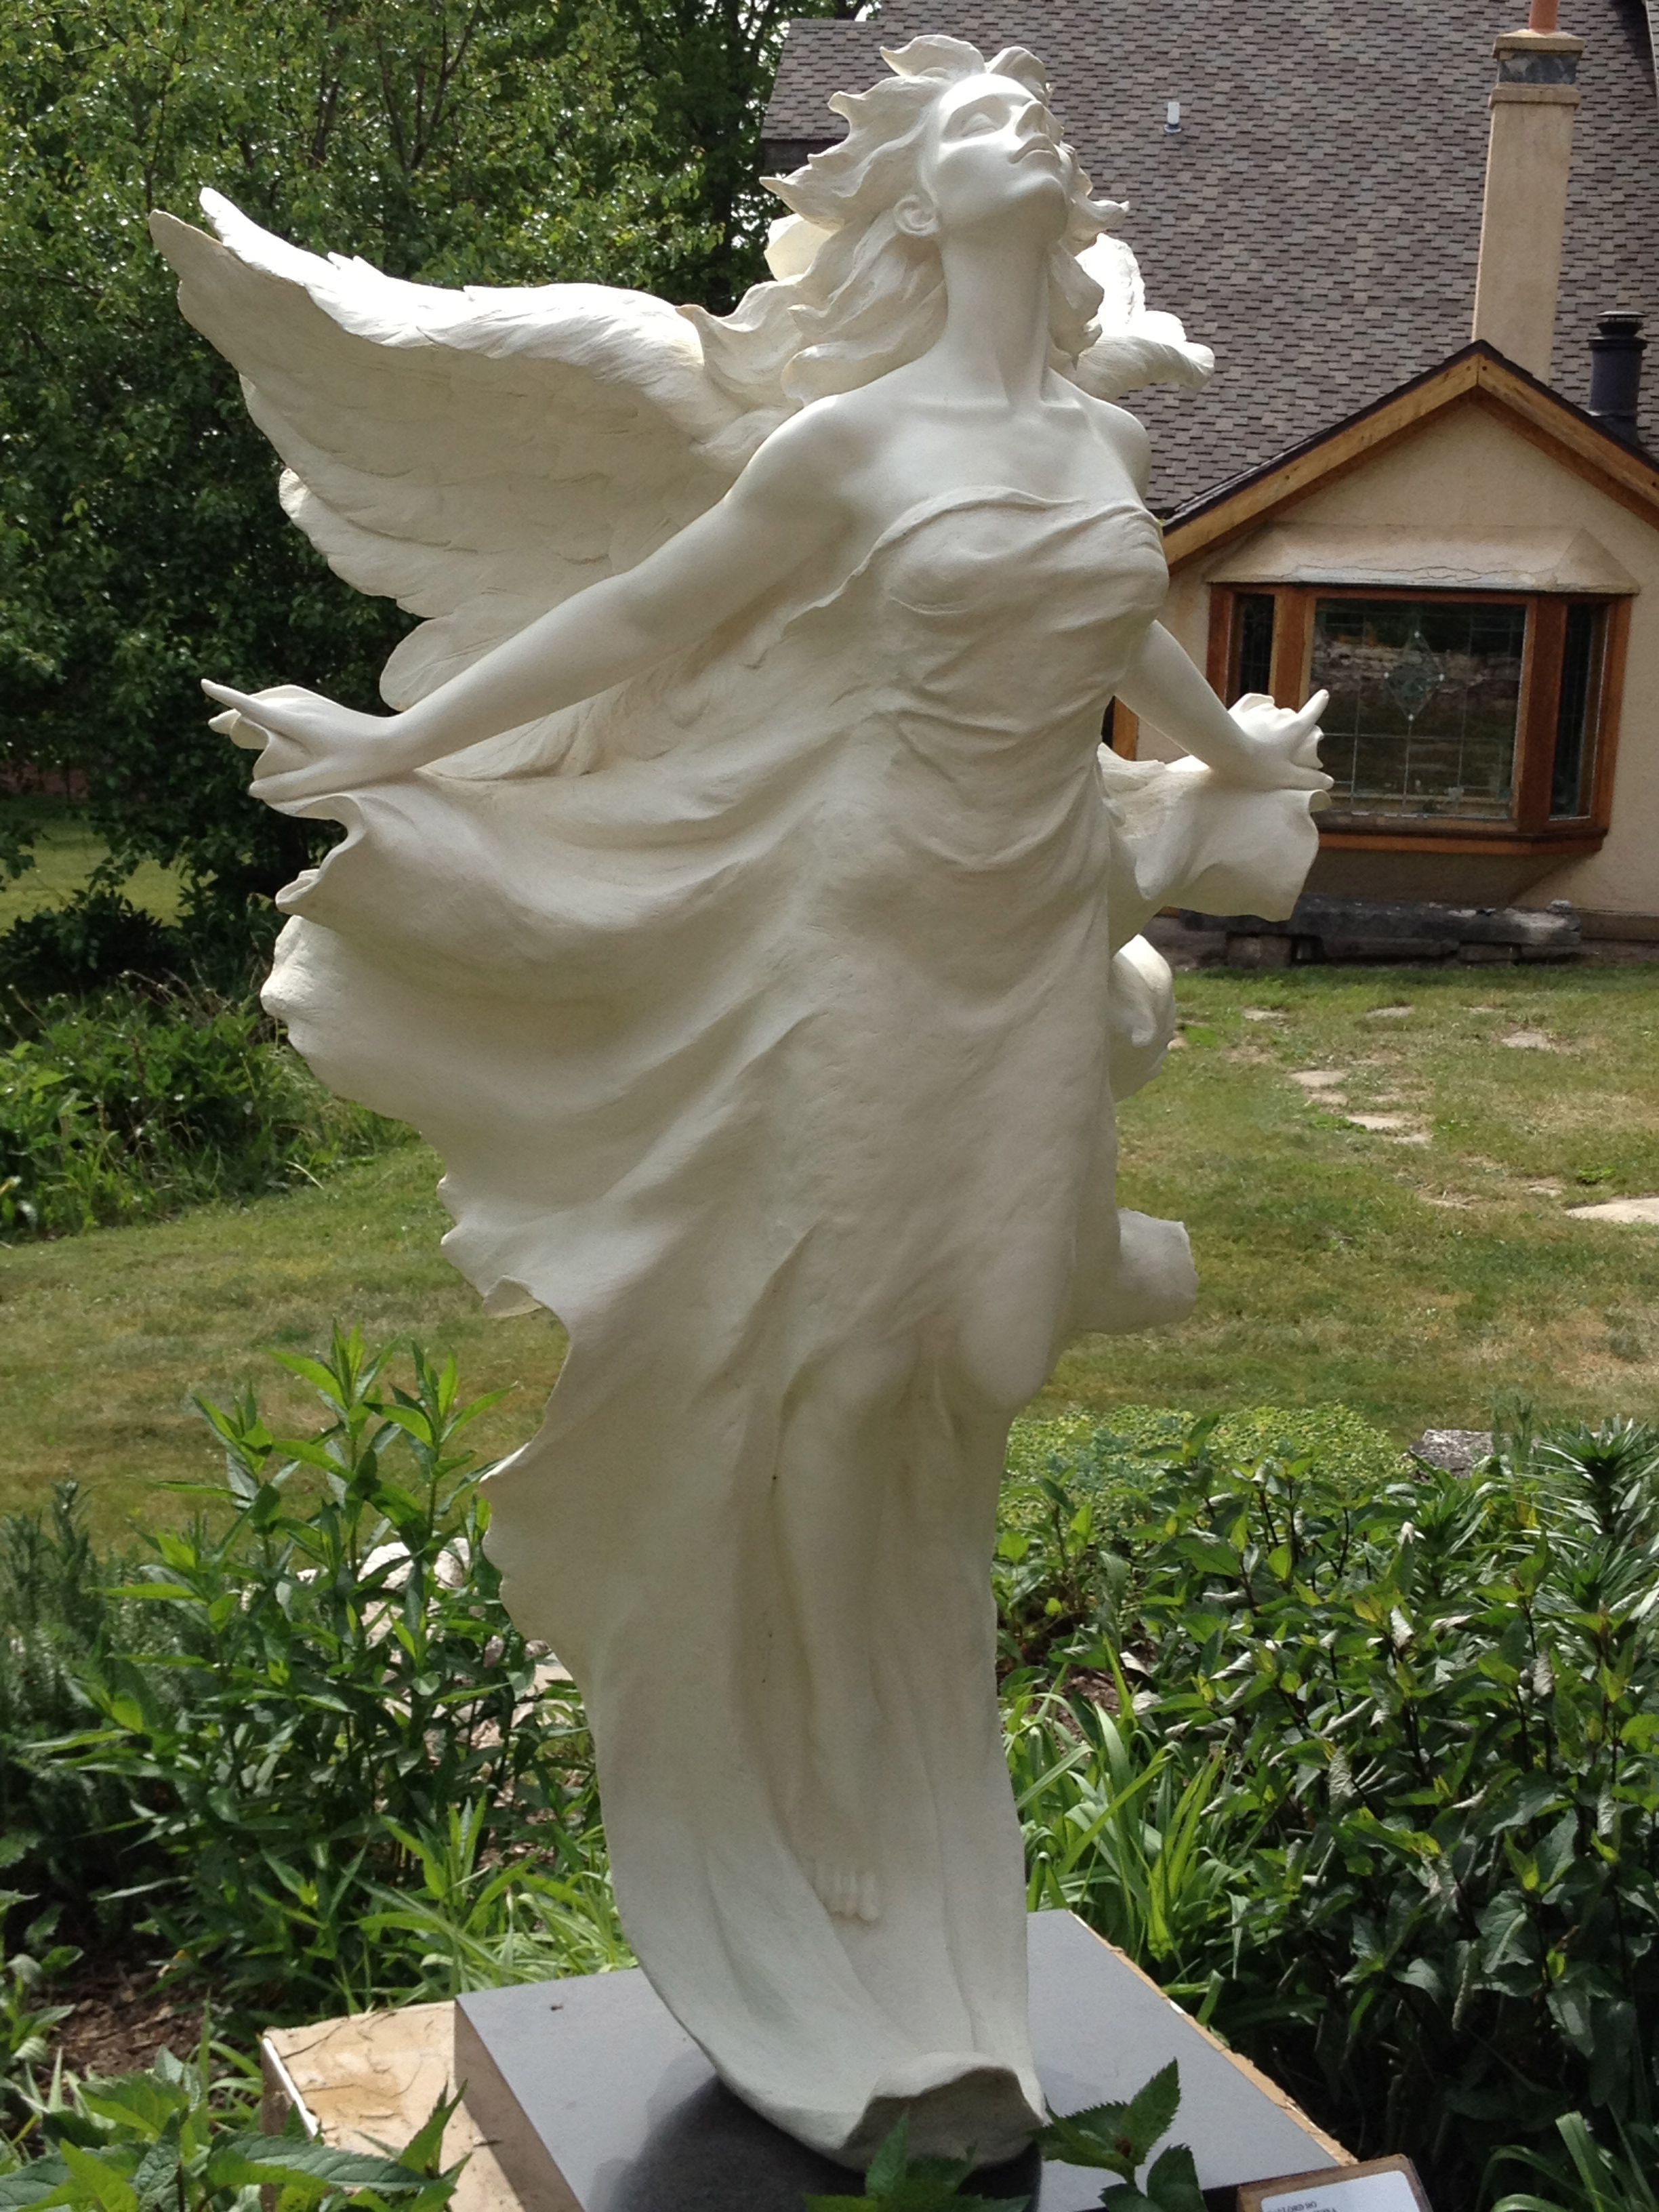 Sculpture at the Edgewood Orchard Garden in Fish Creek, WI | Angels ...